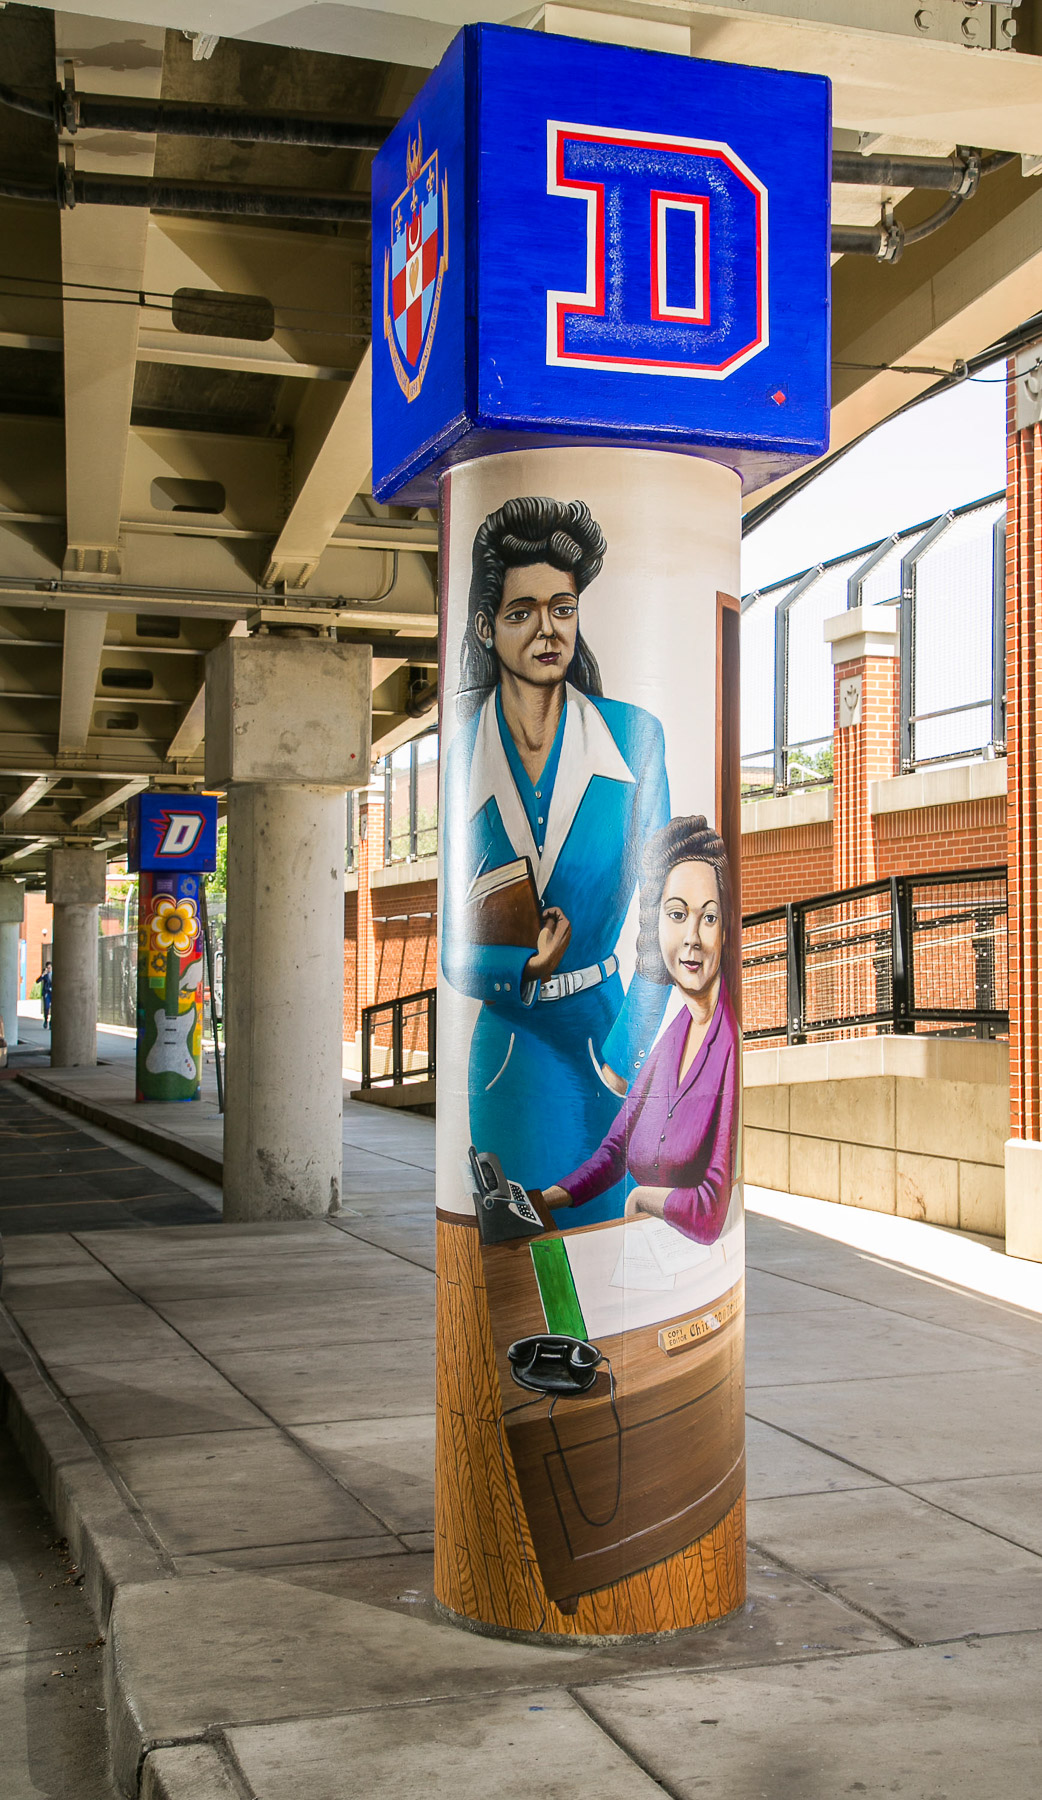 A pillar featuring Rose Vaughn and Marion Amoureux, the university's first African-American women to graduate, is now part of the collection that are part of "The Story of the Little School Under the 'L'" public art project. (DePaul University/Jamie Moncrief)